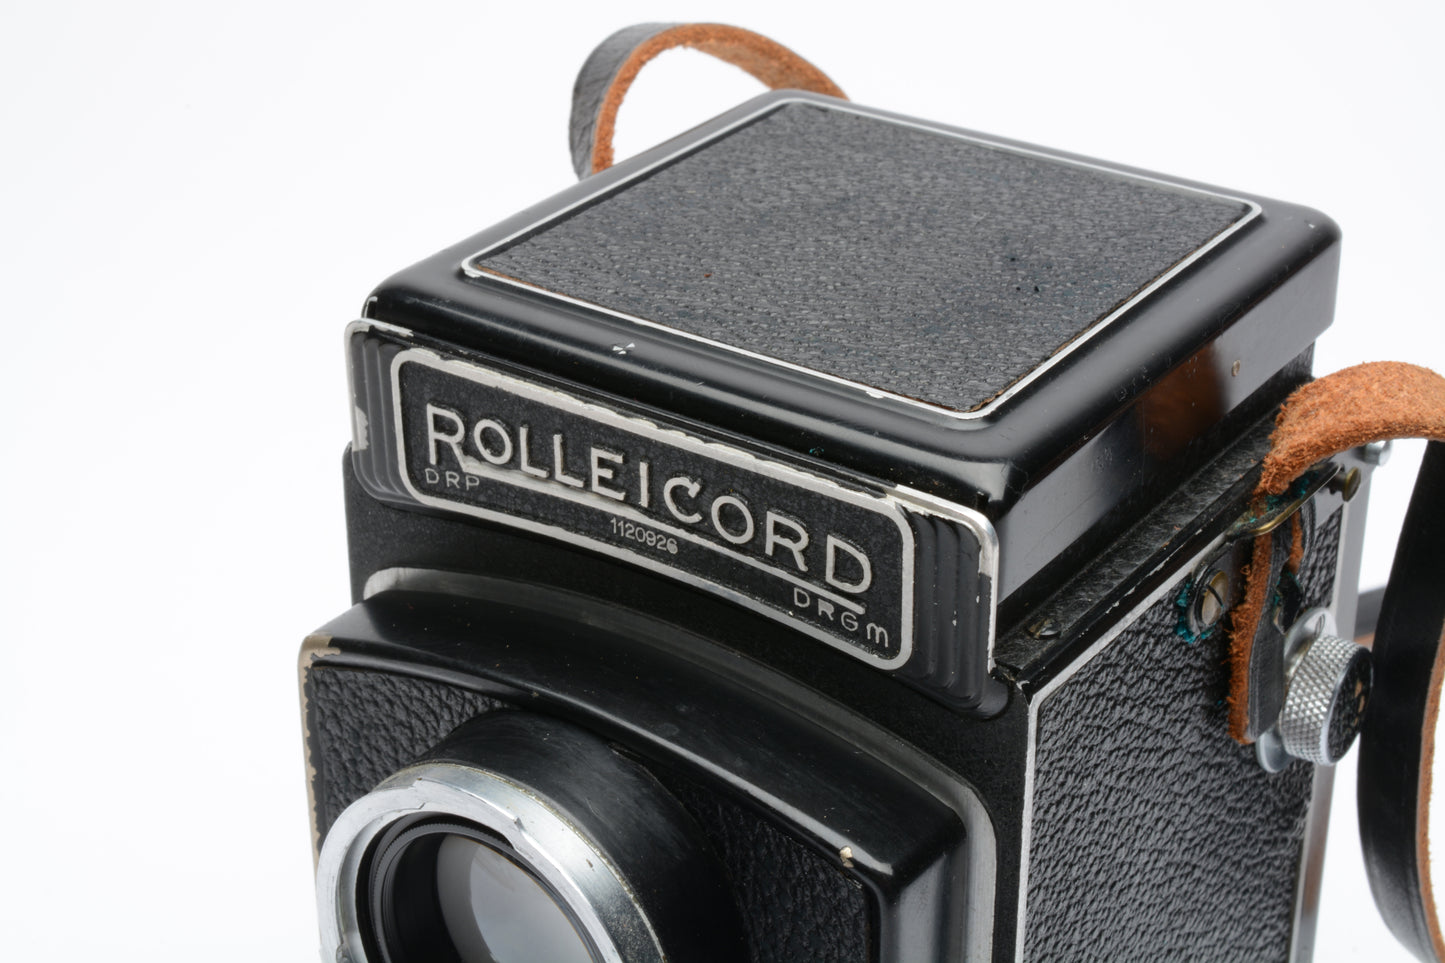 Rollei Rolleicord IID V Model K3 TLR w/ Zeiss Triotar 75mm f3.5 lens, tested, nice + Case